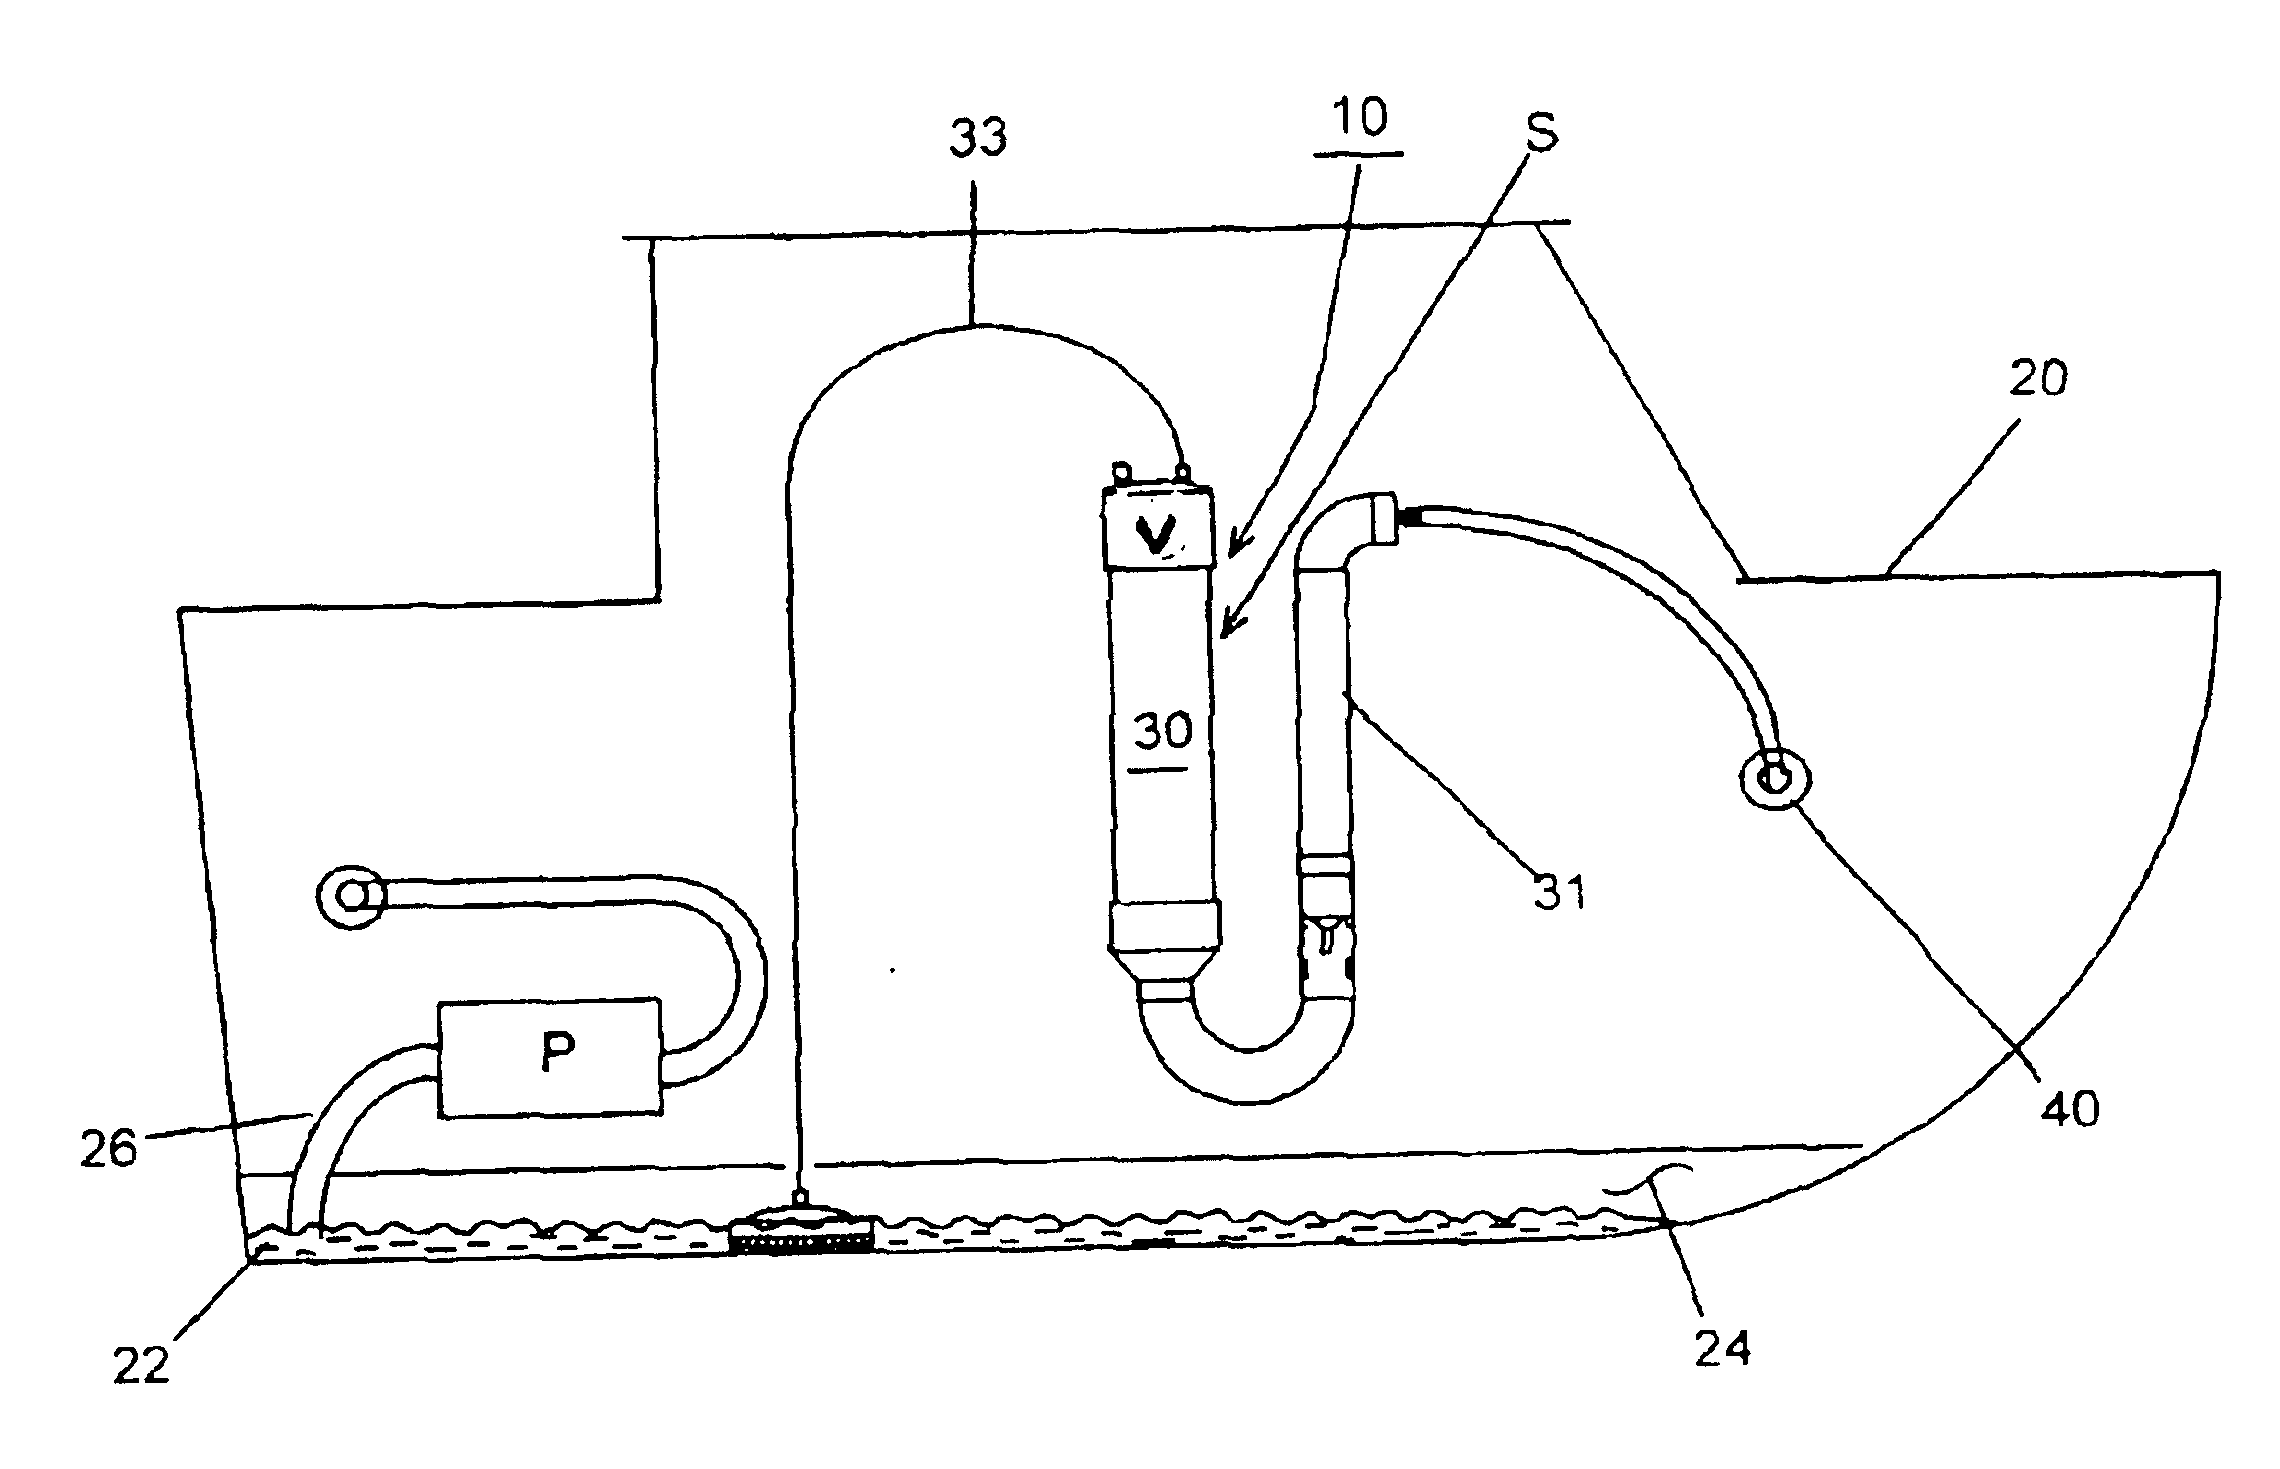 Pneumatic bilge liquid removal system and method therefor